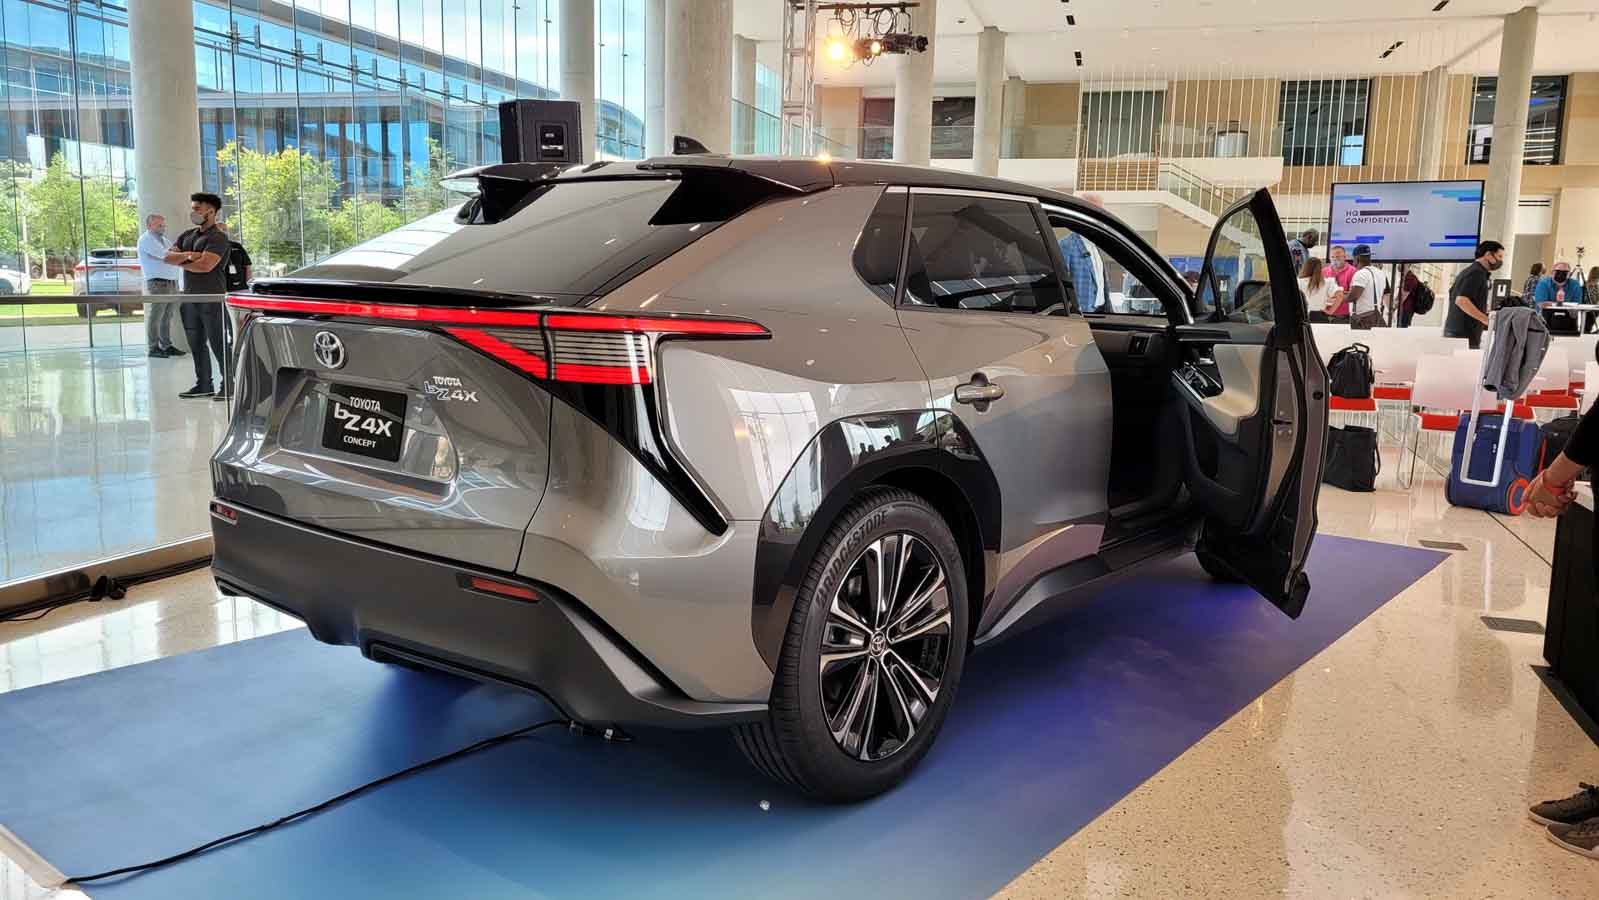 Toyota Electric SUV For India Could Be Offered In 2WD & 4WD Guises